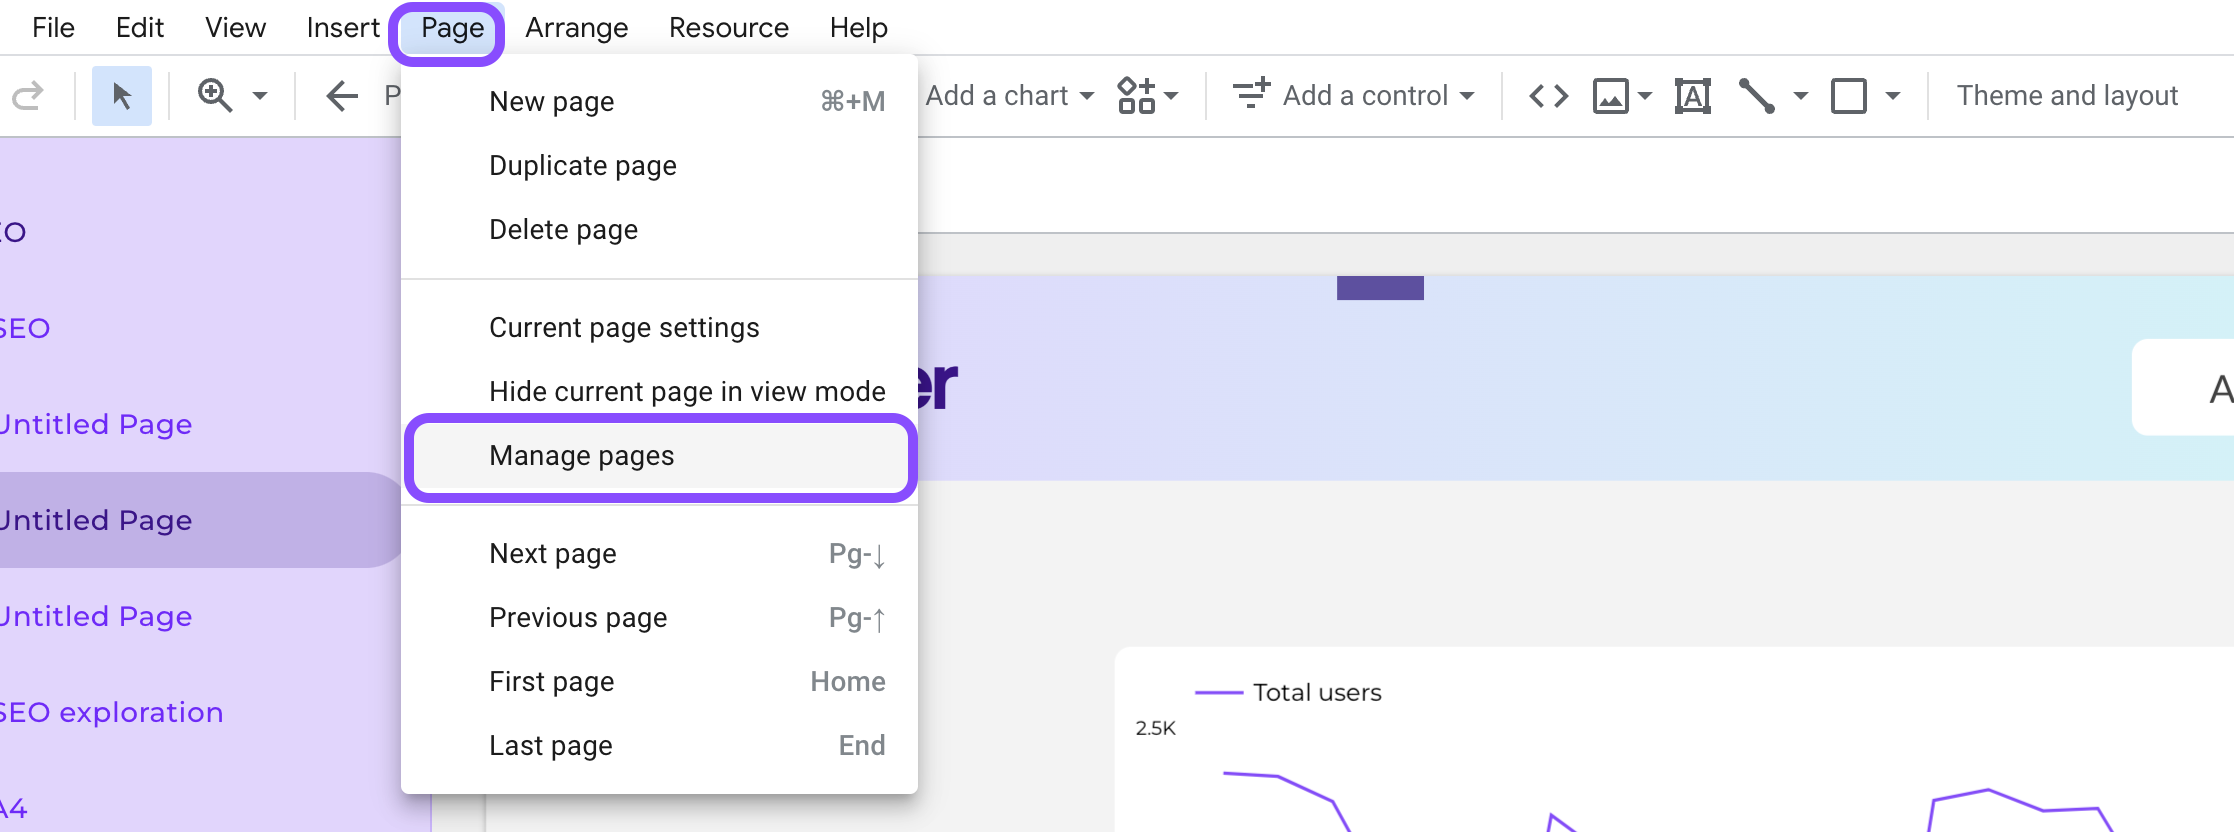 Manage pages on Looker Studio